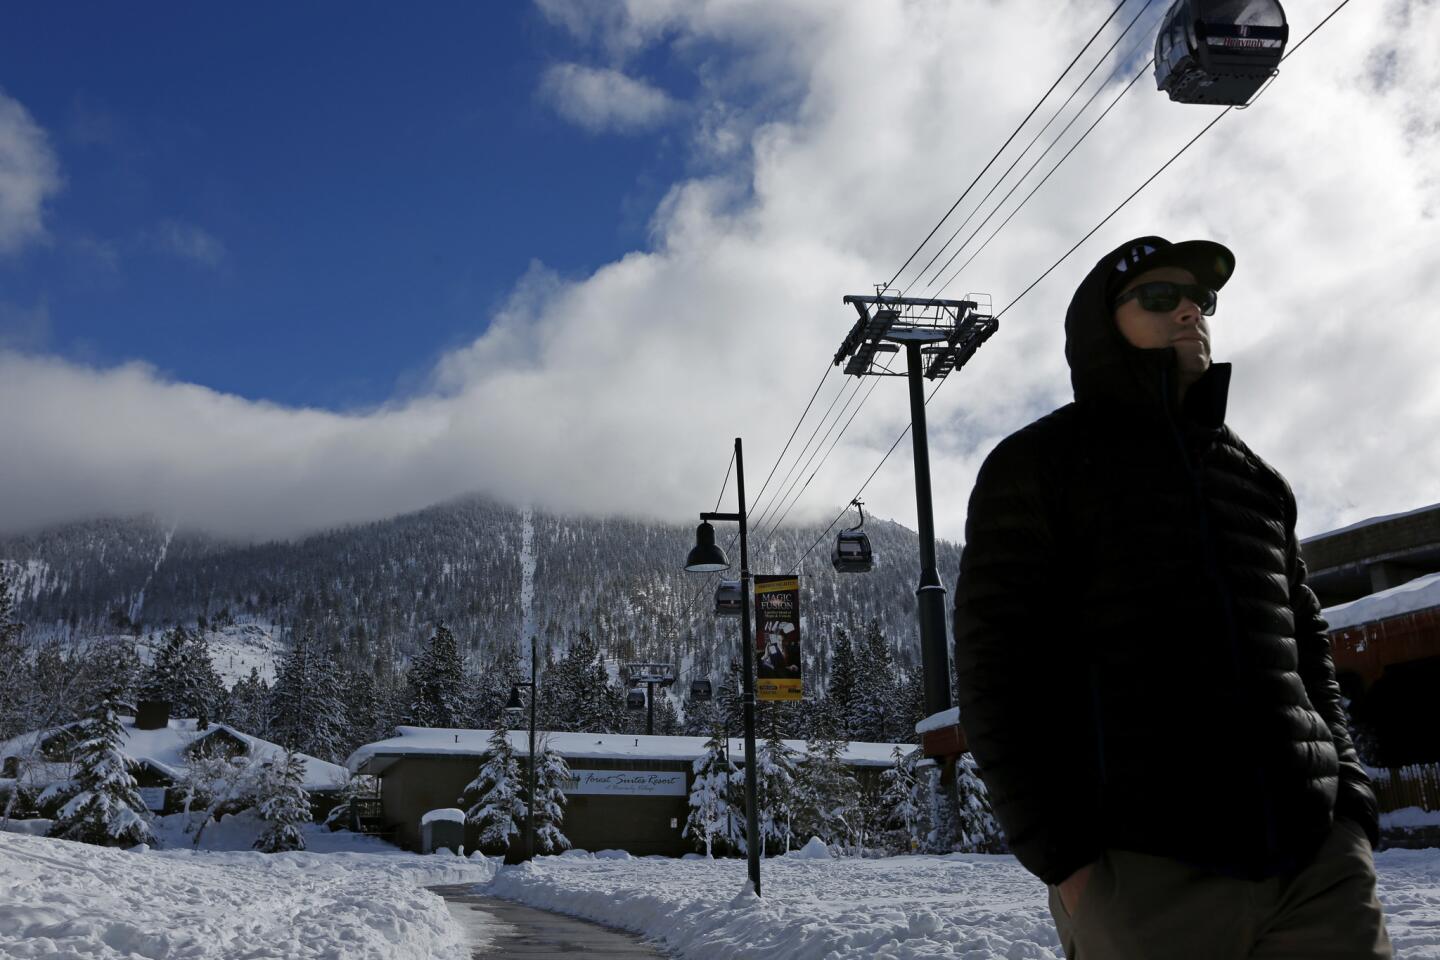 Recent storms have blanketed Northern California